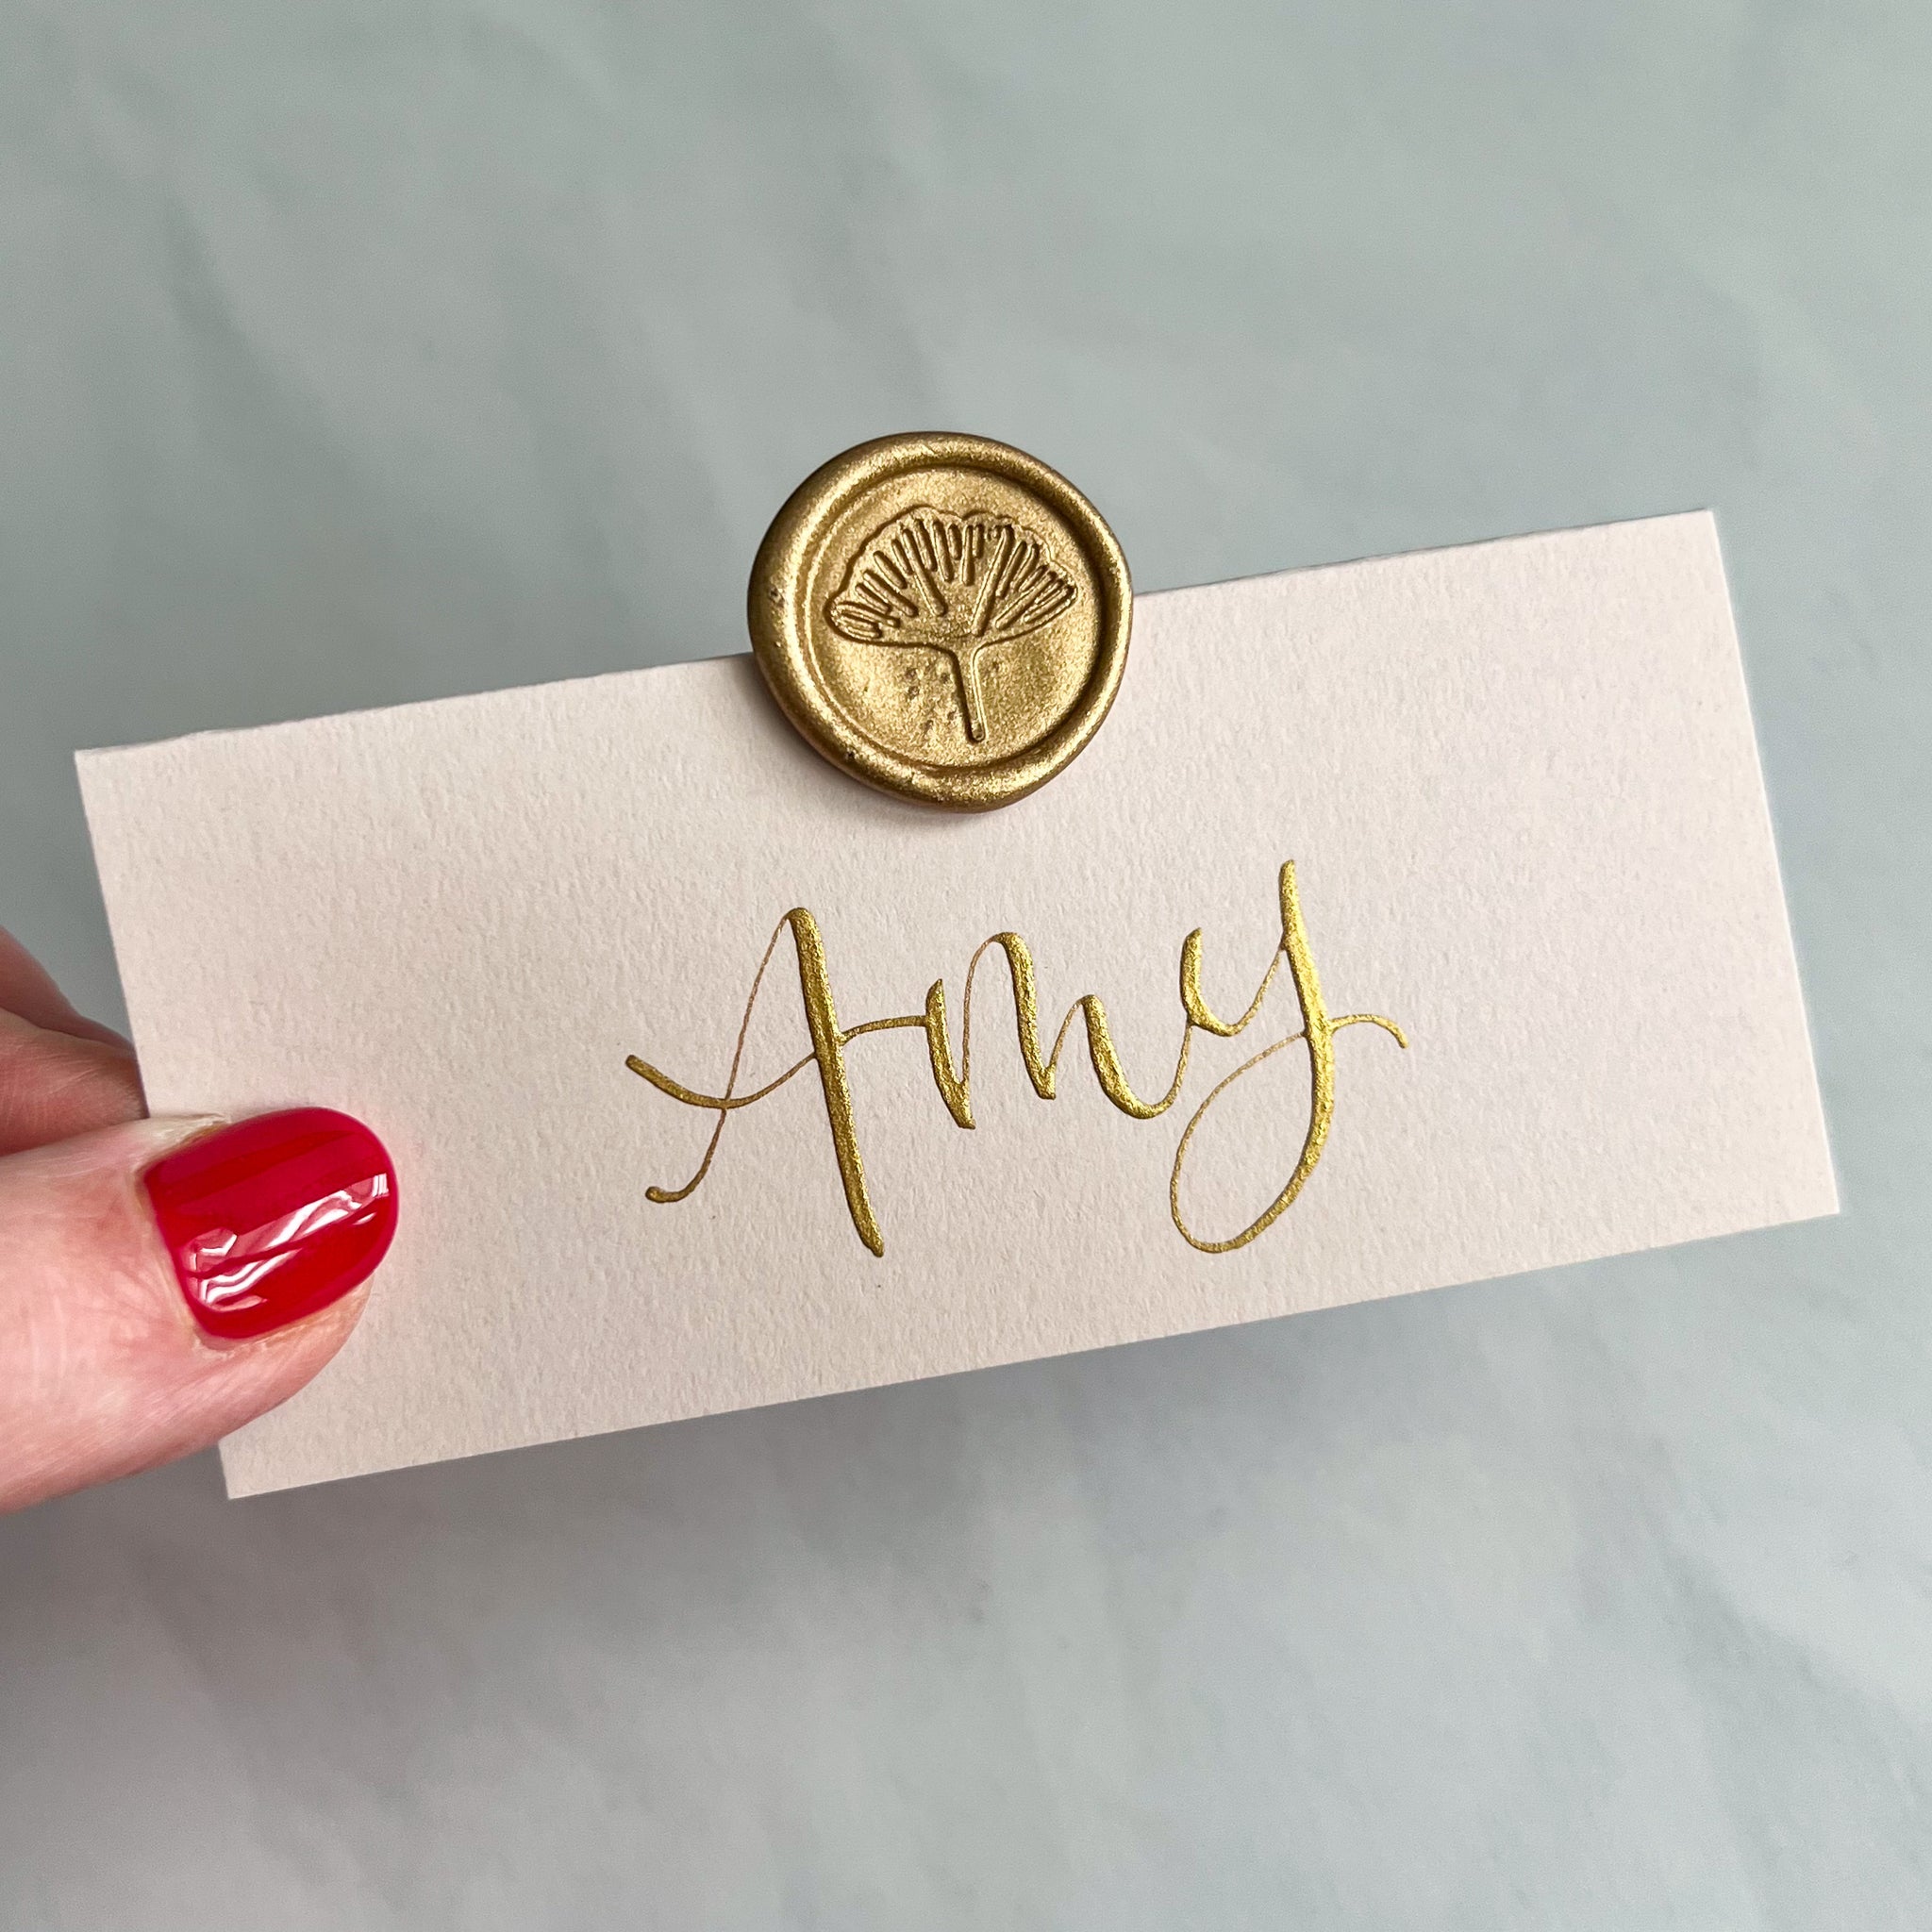 Blush pink place cards with wax seal